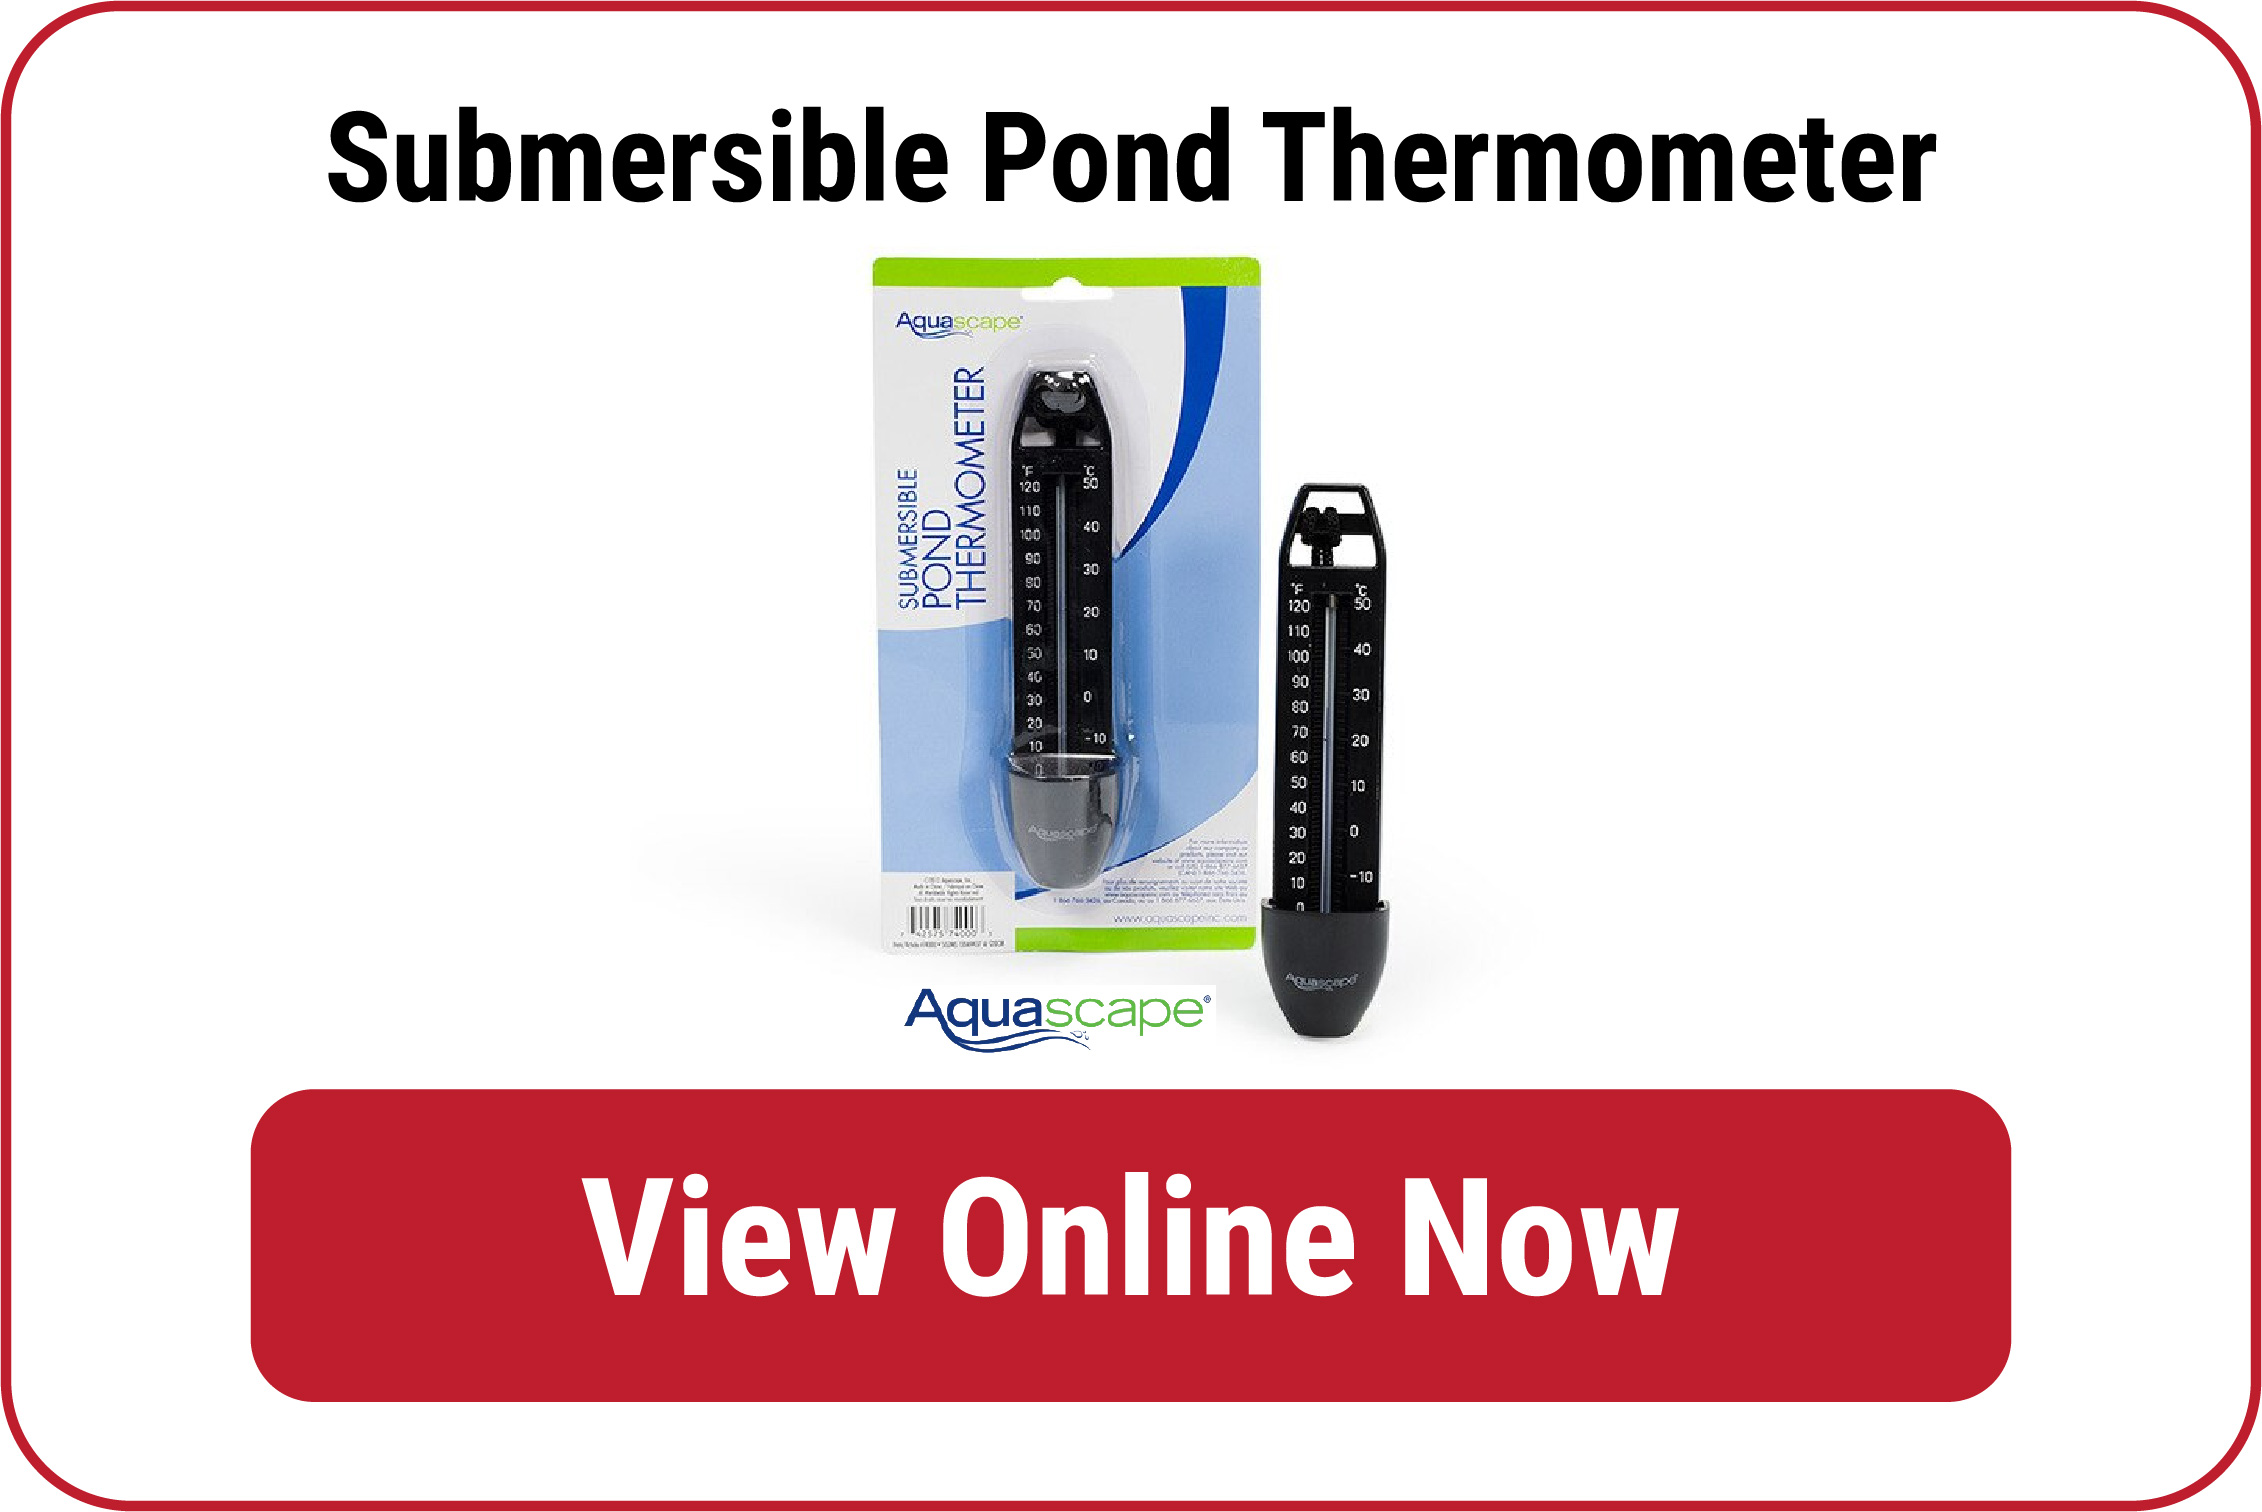 Submersible Pond Thermometer